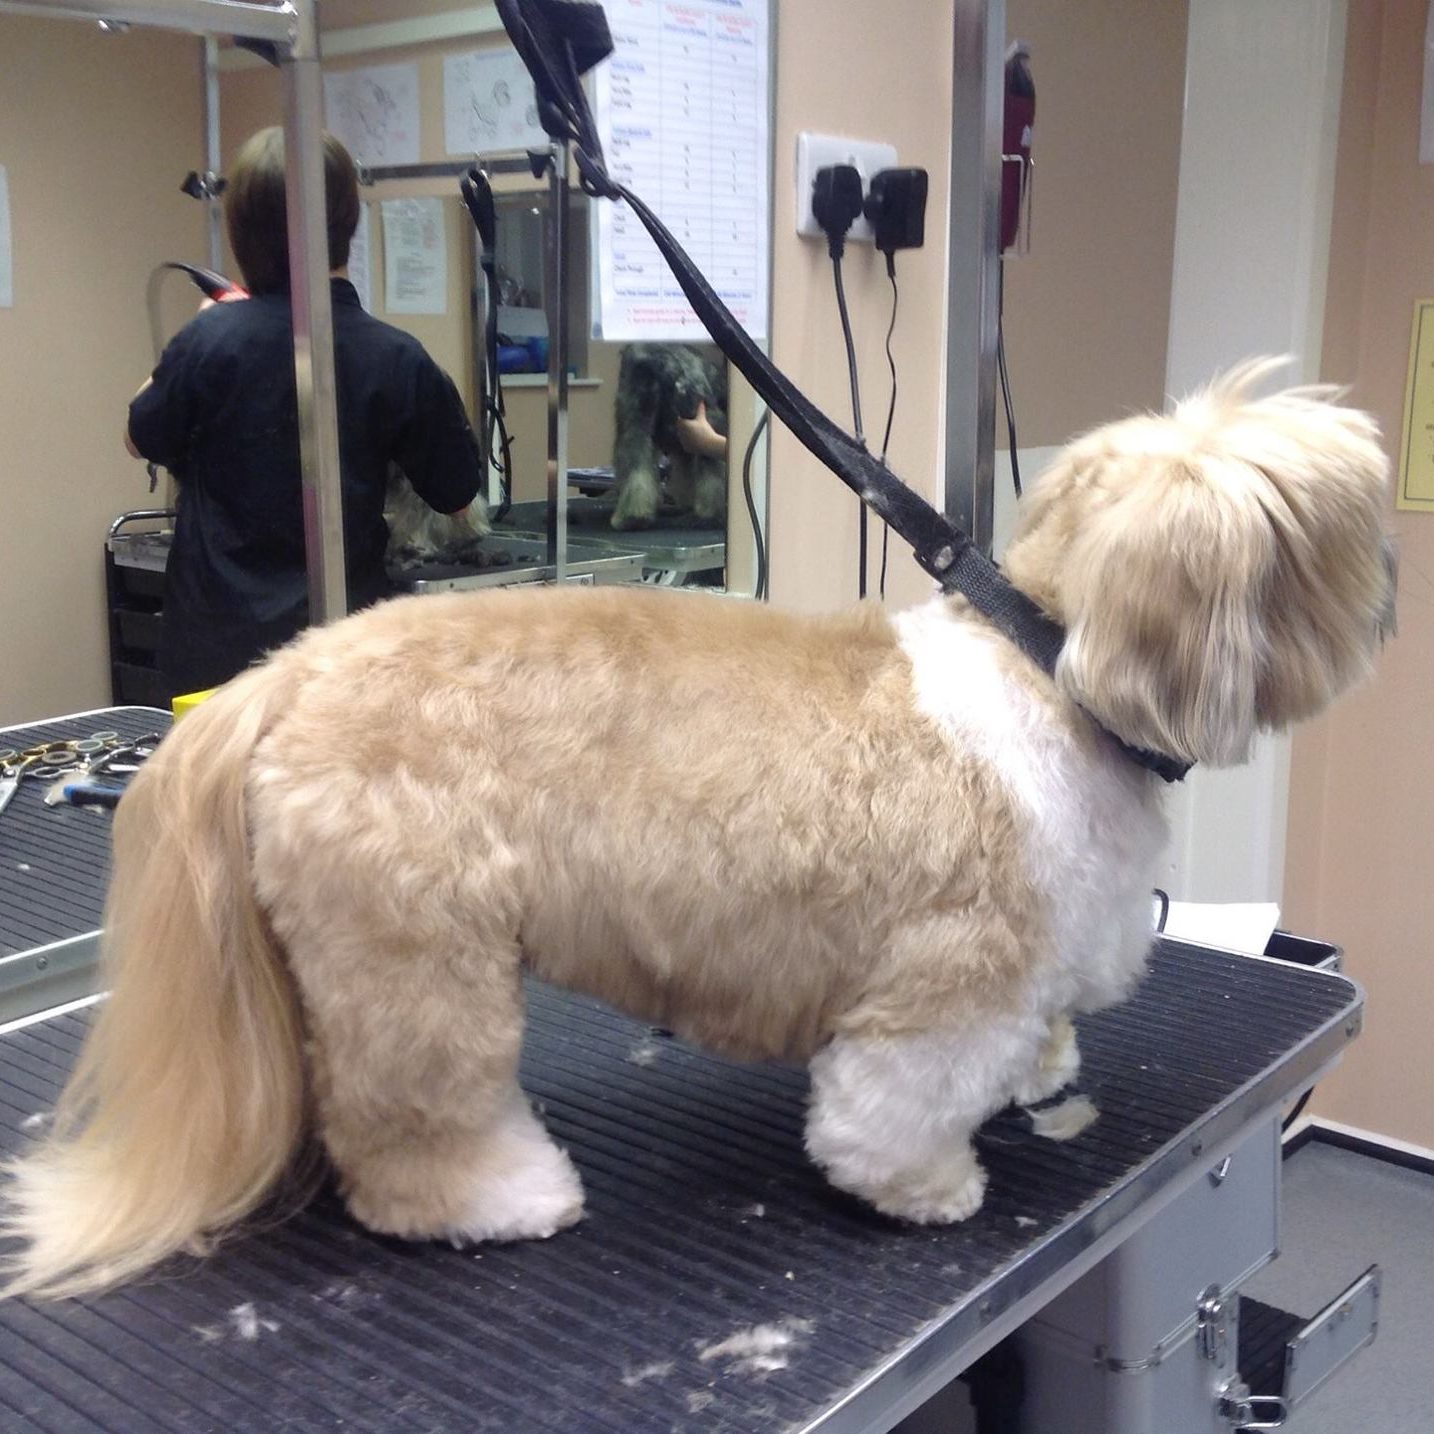 Small white and brown dog being held while getting a trim